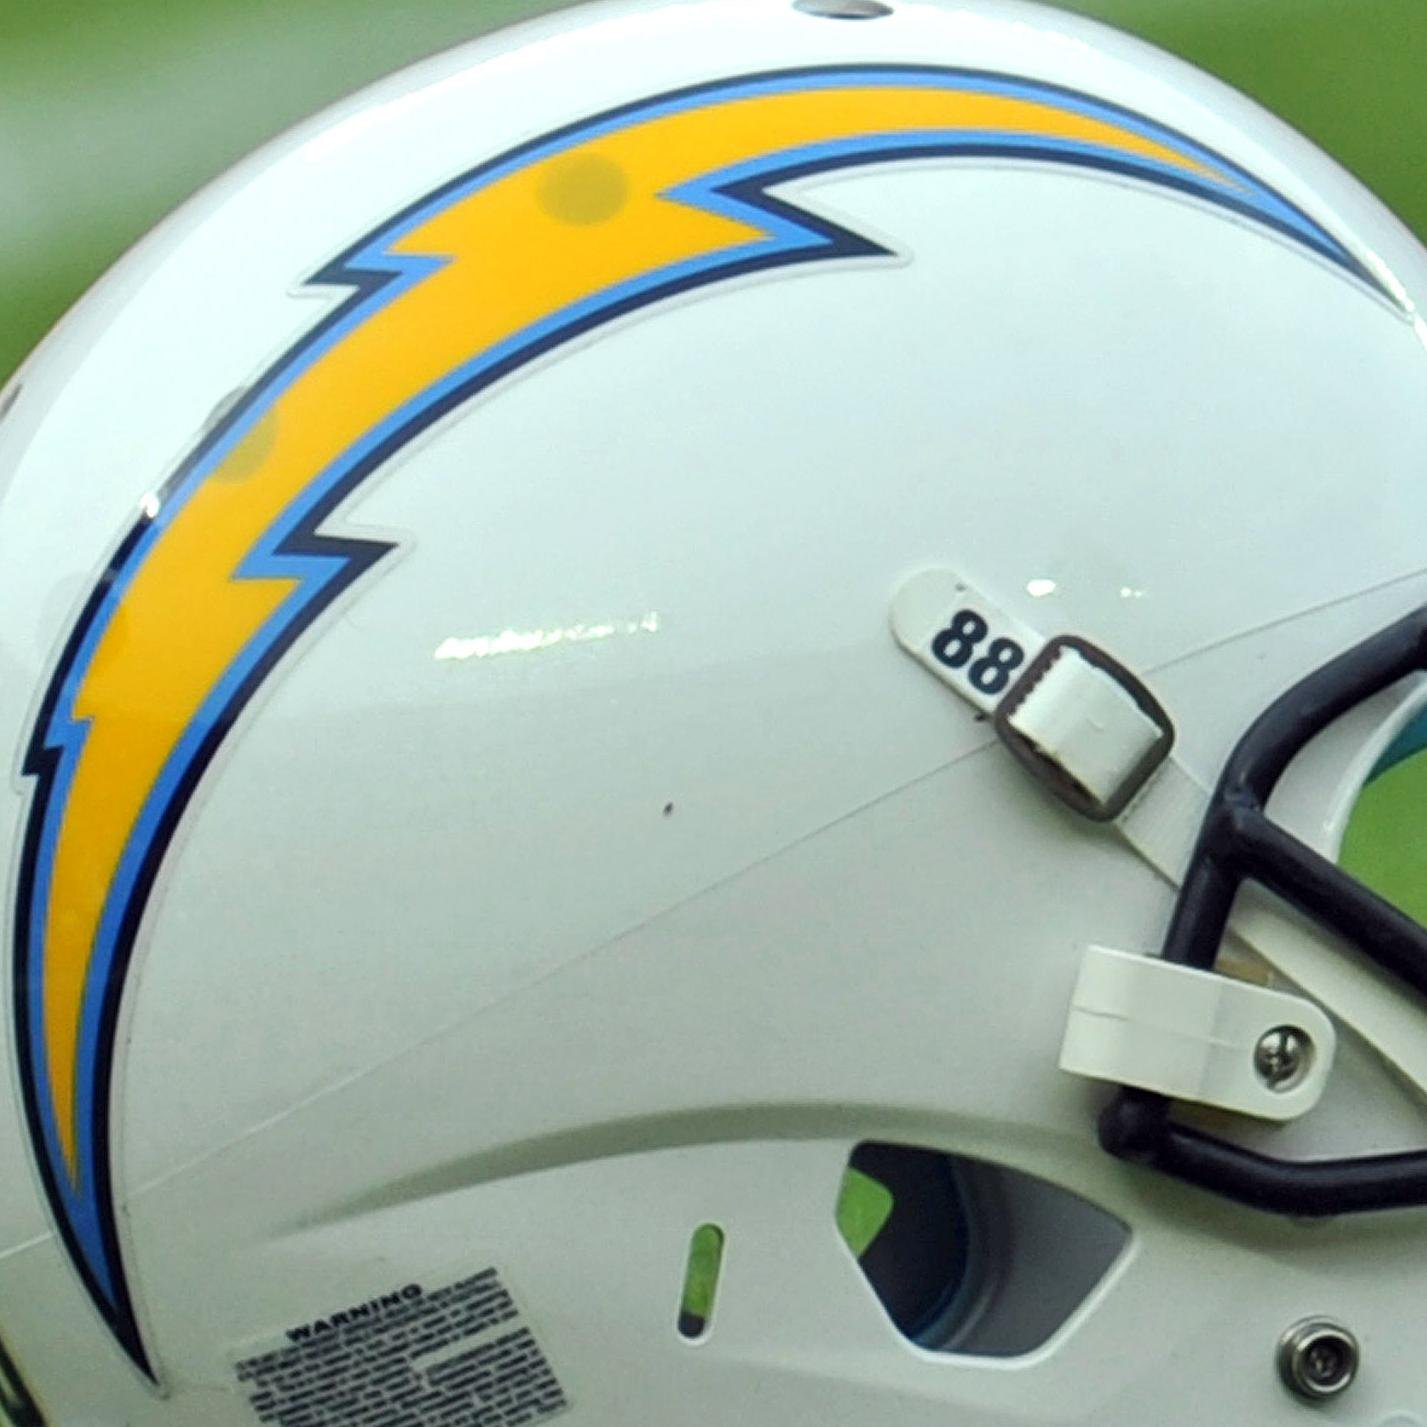 San Diego Chargers NFL football draft and recruiting news and community from Maven.